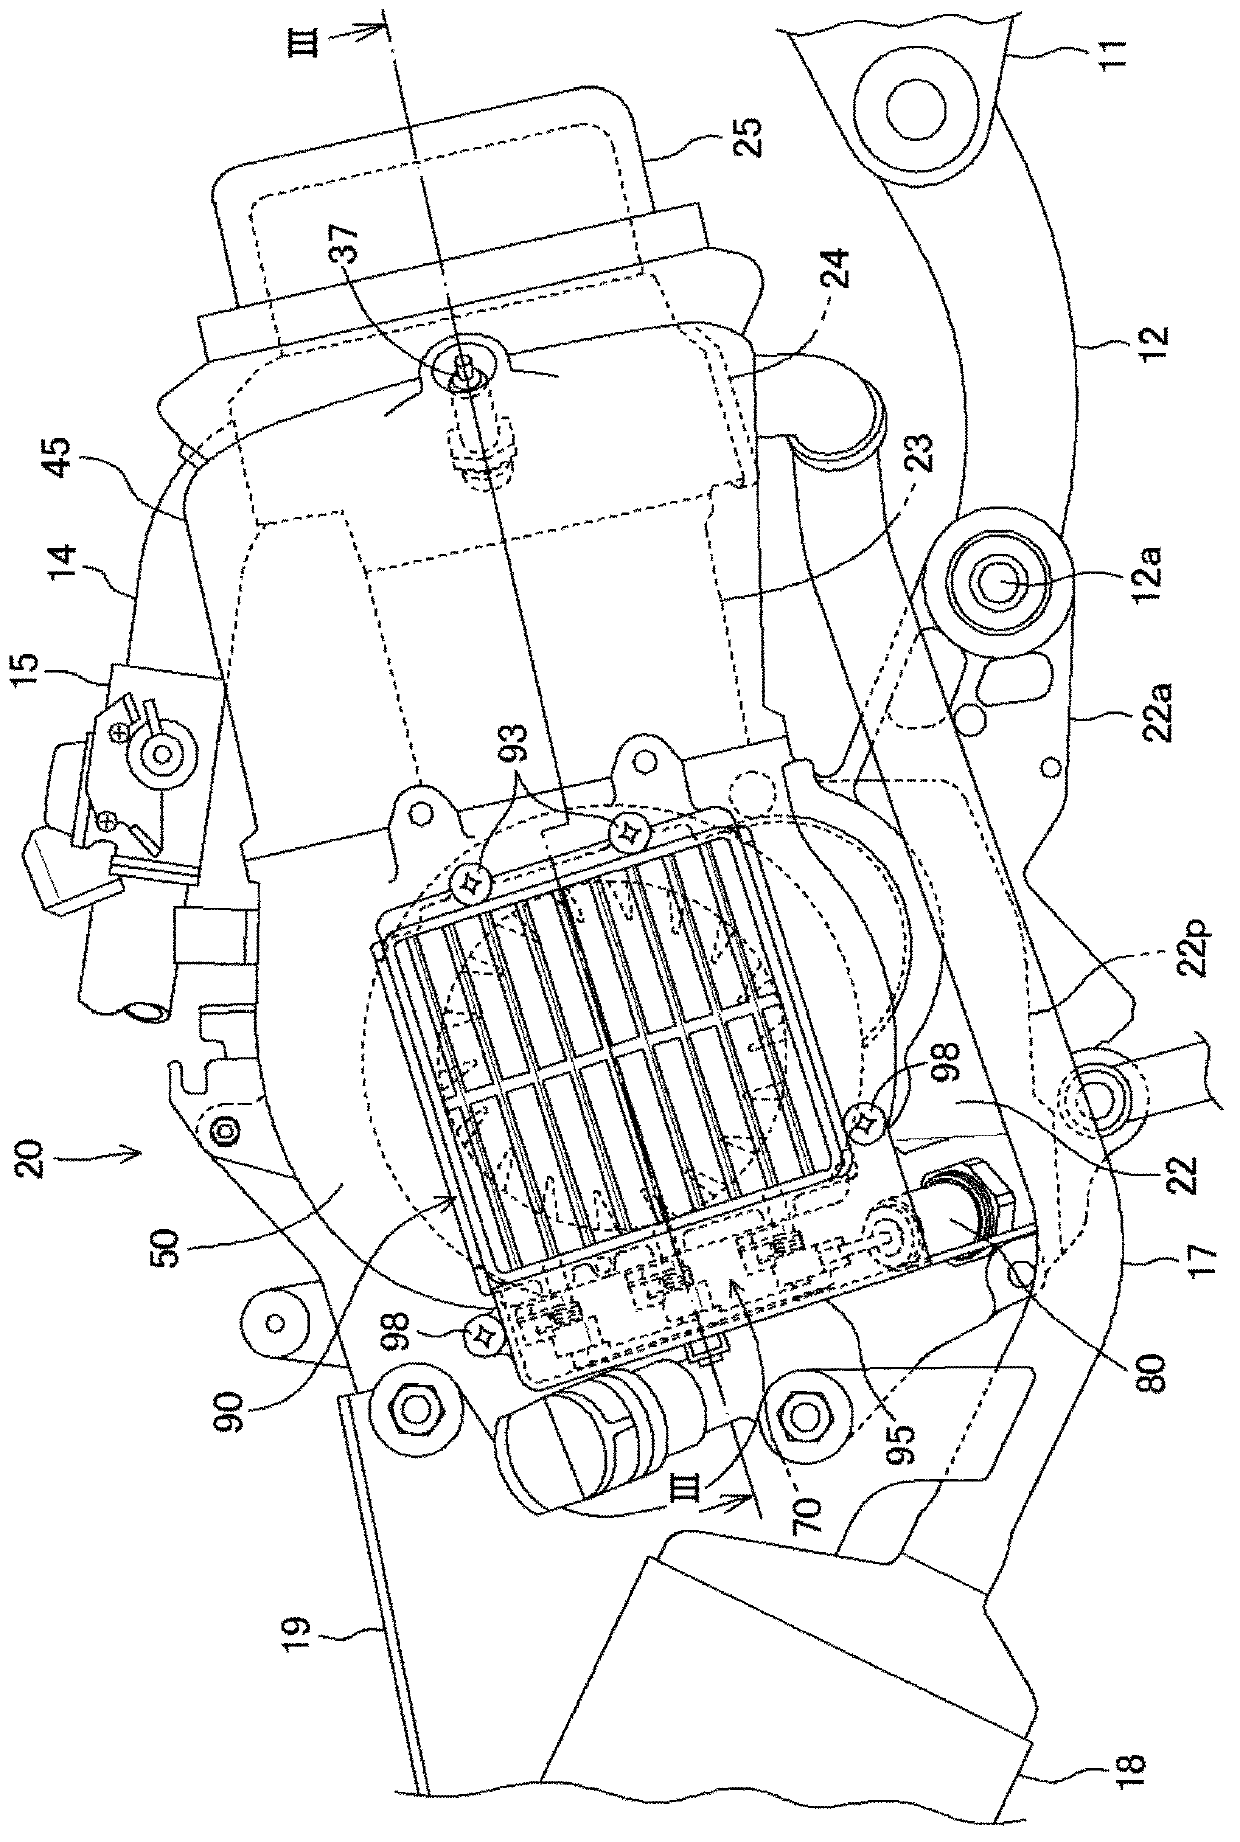 Cooling device for internal combustion engine